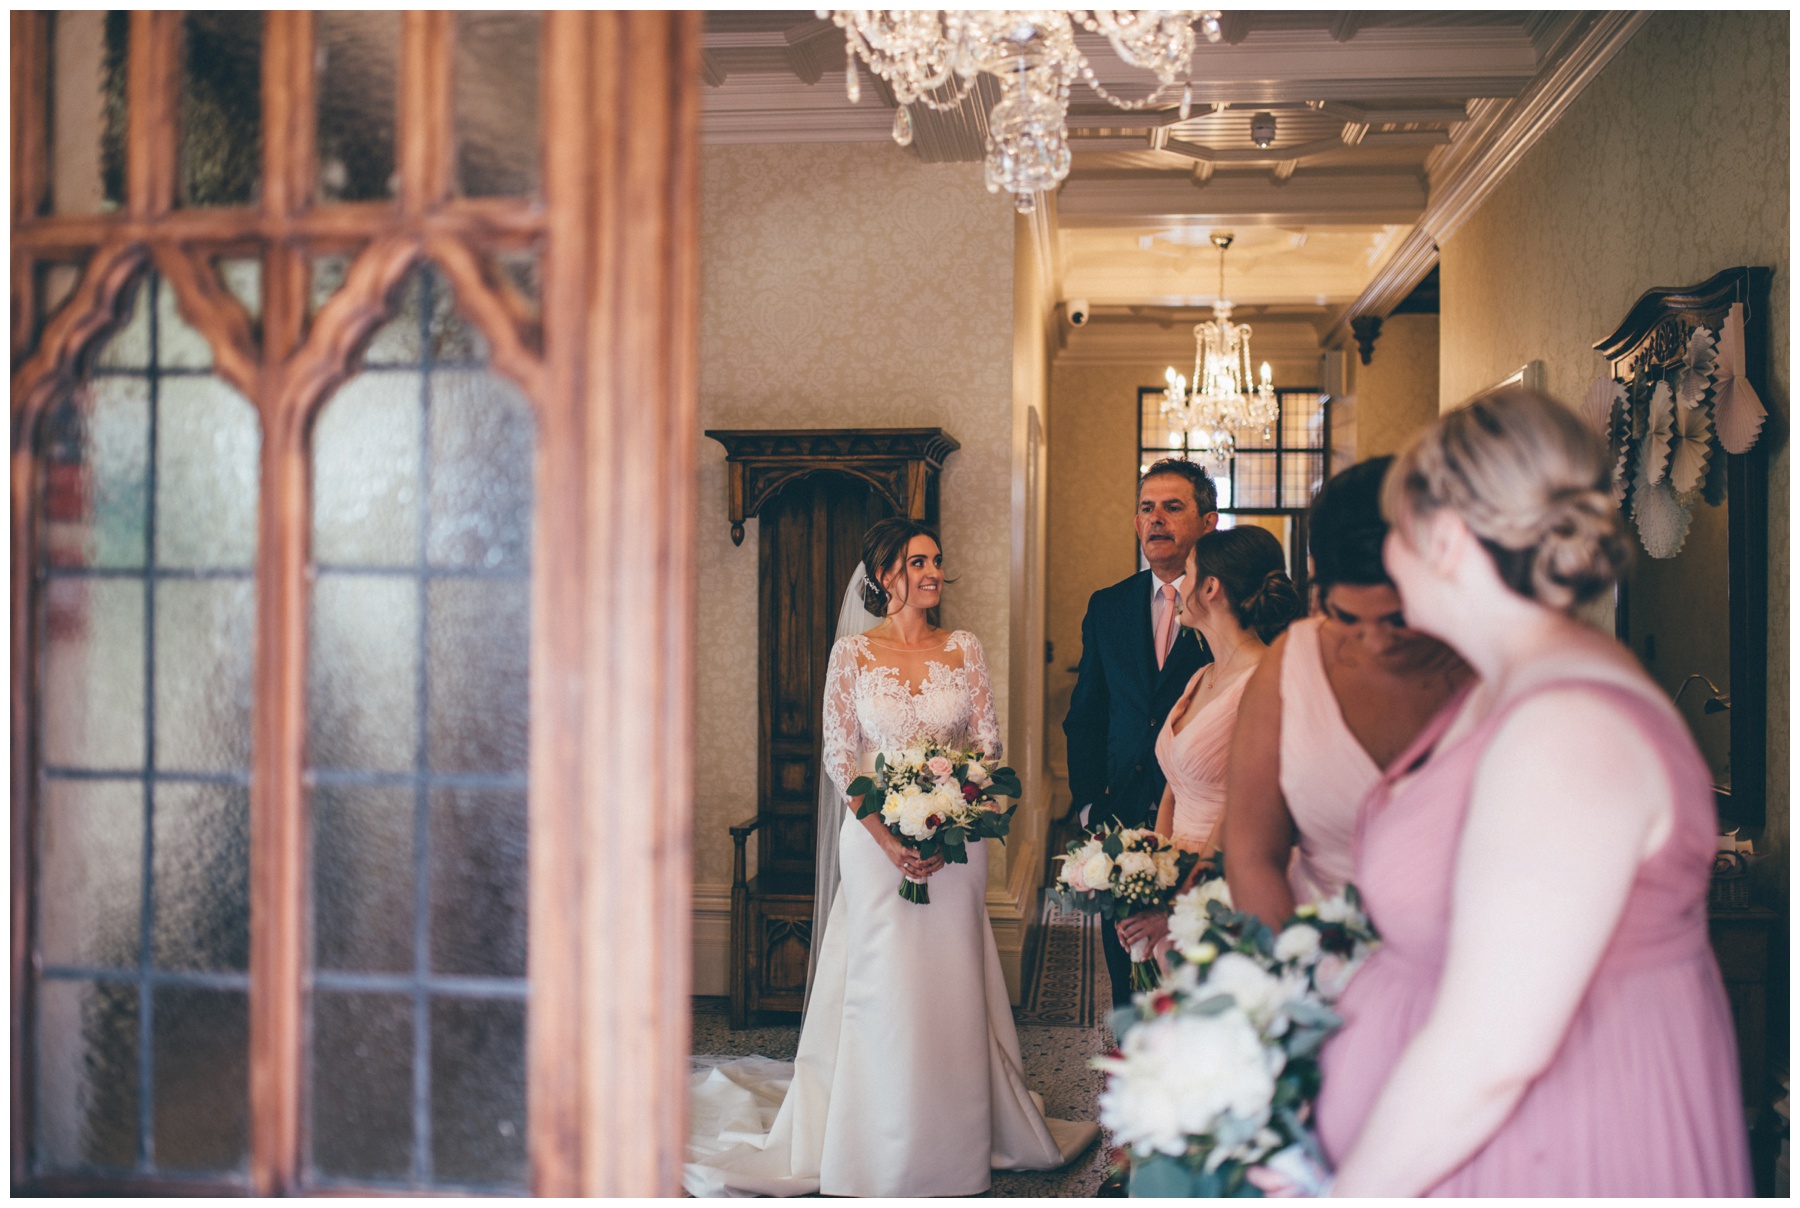 The bridal party waiting to walk down the aisle at Tilstone House.